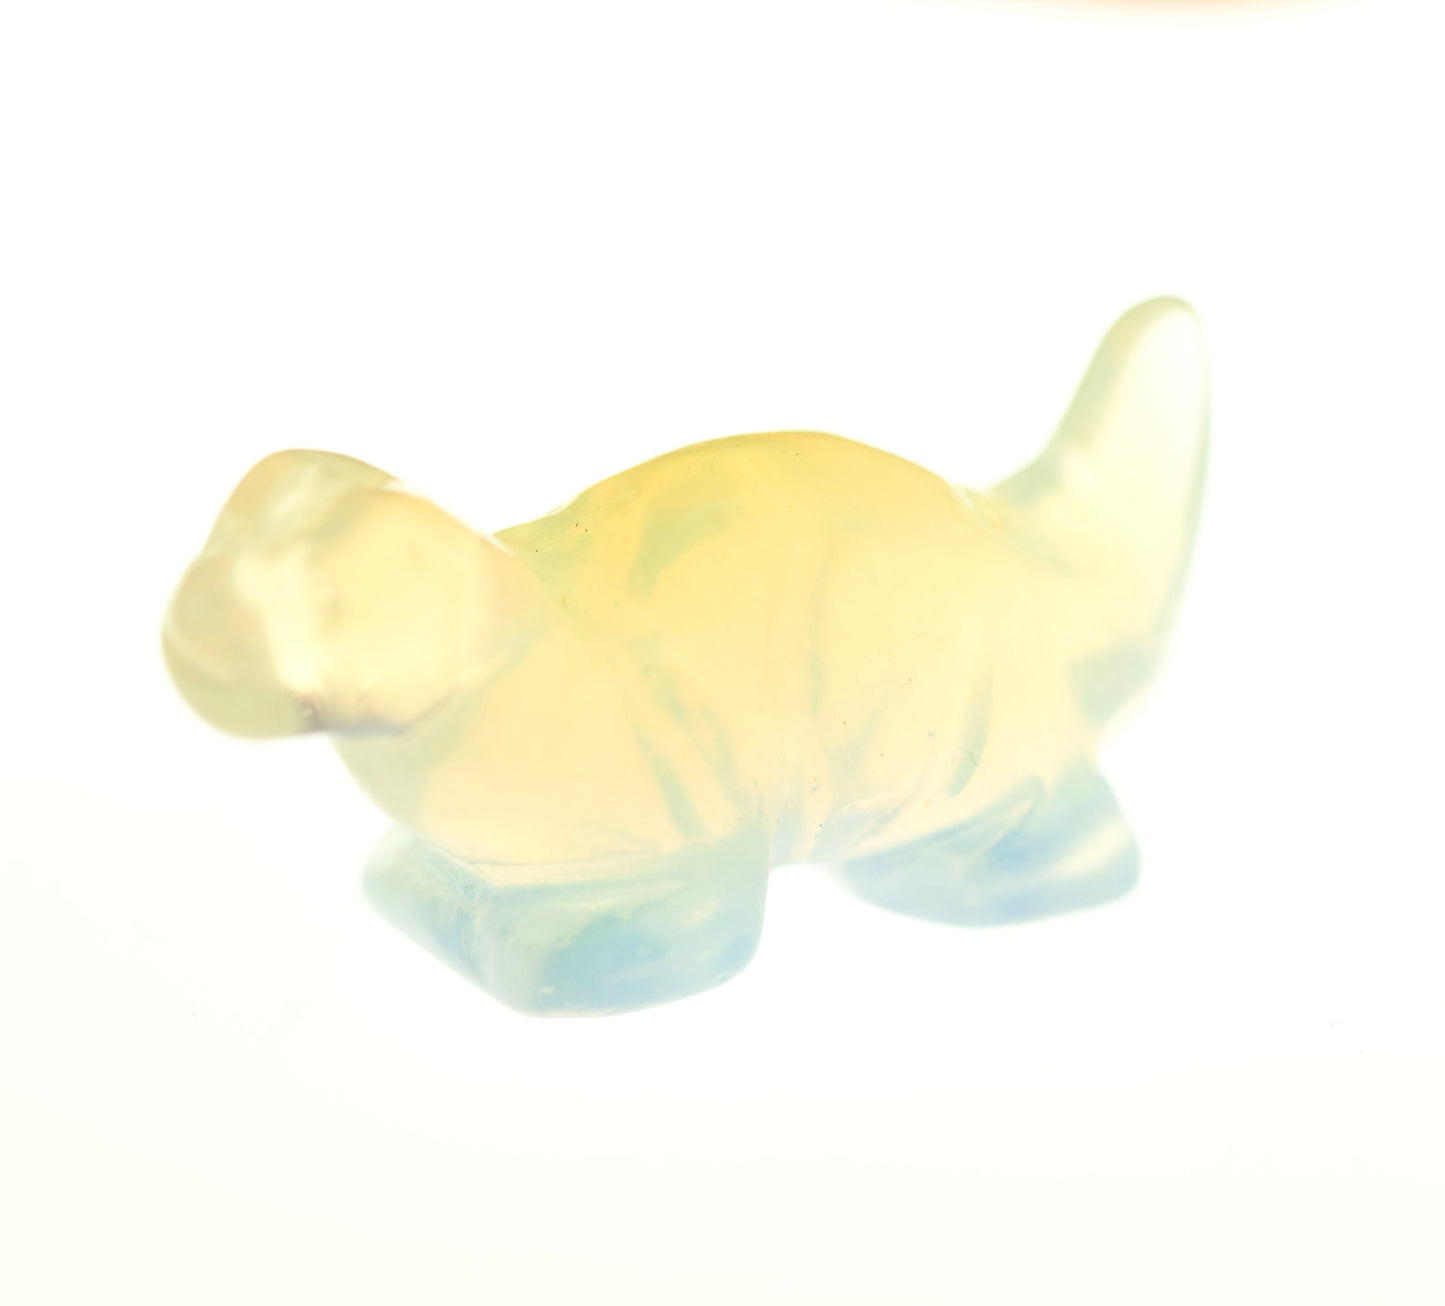 Translucent, small Carved Dinosaur Gemstone Figures in pale yellow and light blue, reminiscent of opalite, photographed against a white background.